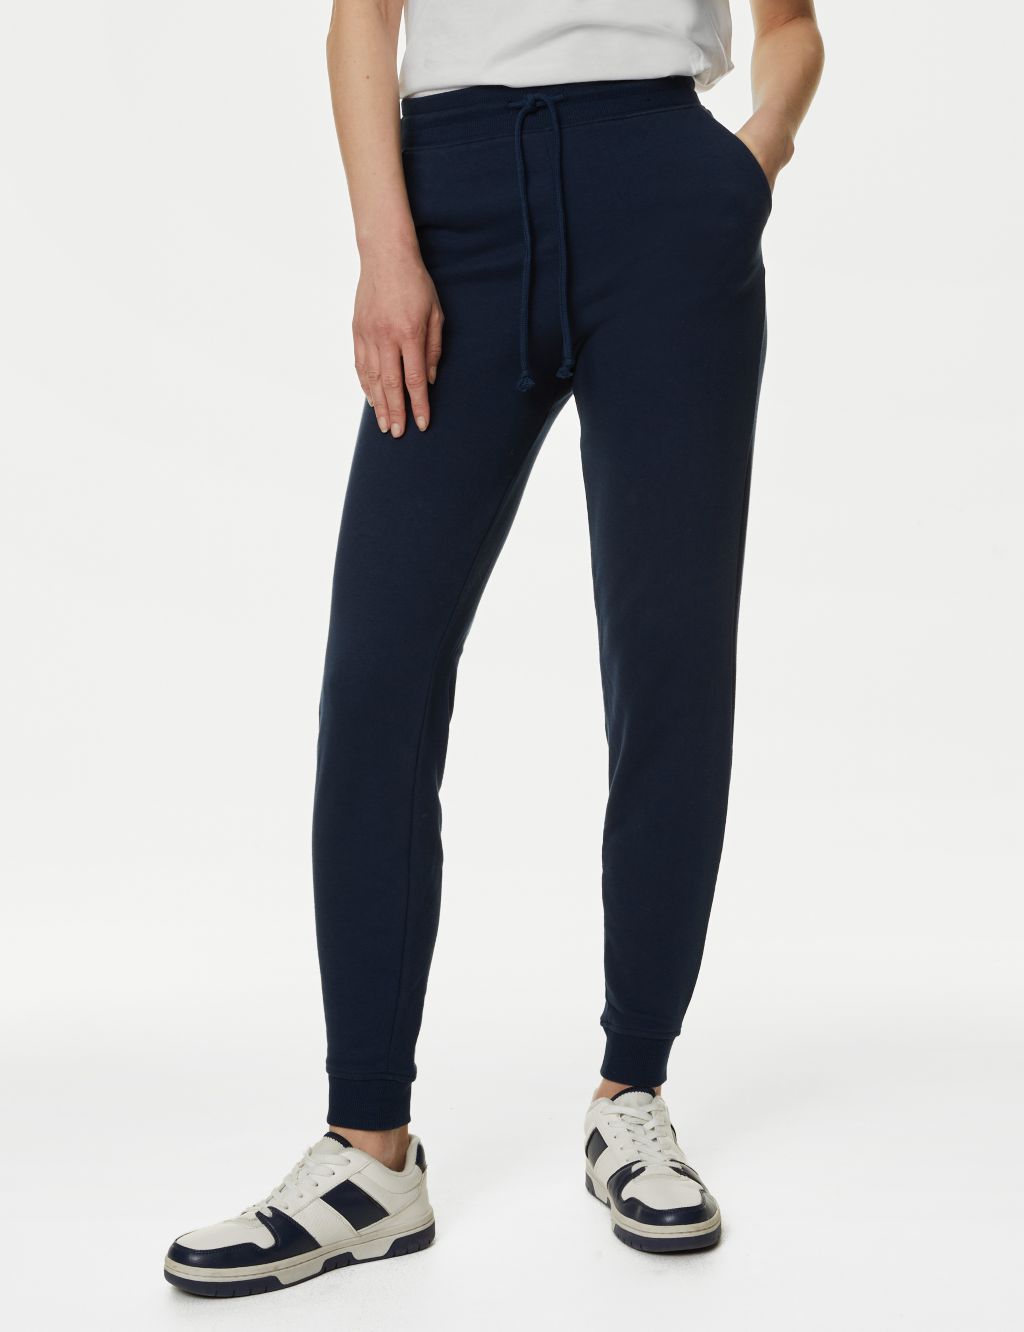 The Cotton Rich Cuffed Joggers image 4